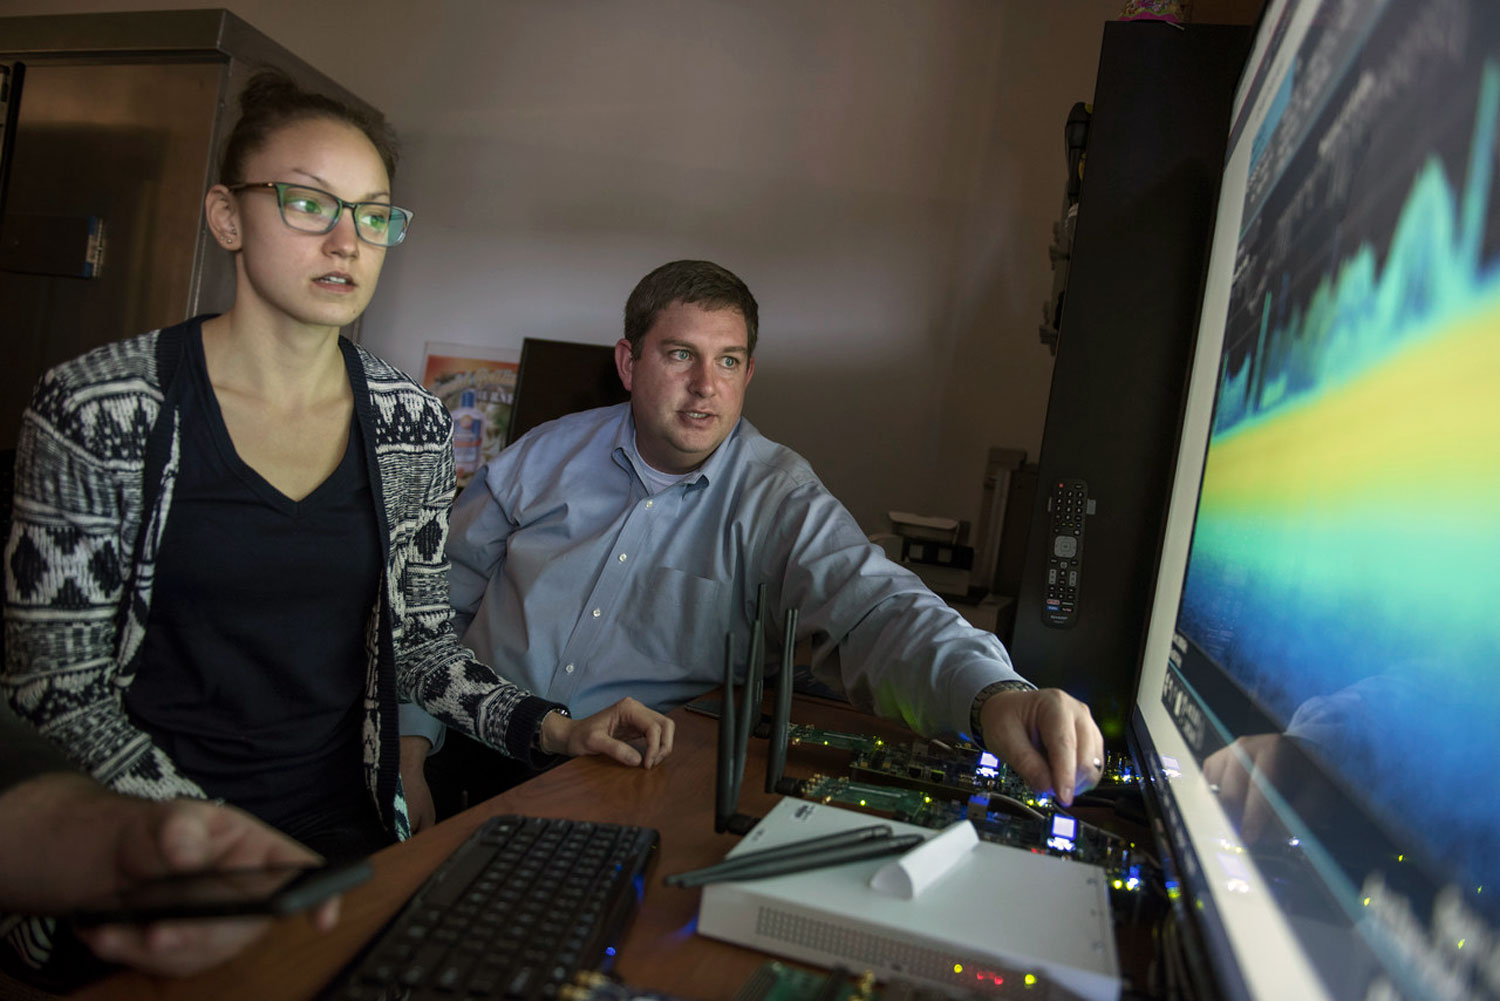 The Virginia Tech National Security Institute brings together transdisciplinary researchers, programs, and resources from across the university and integrates hands-on learning to prepare students for the intelligence and defense workforce.